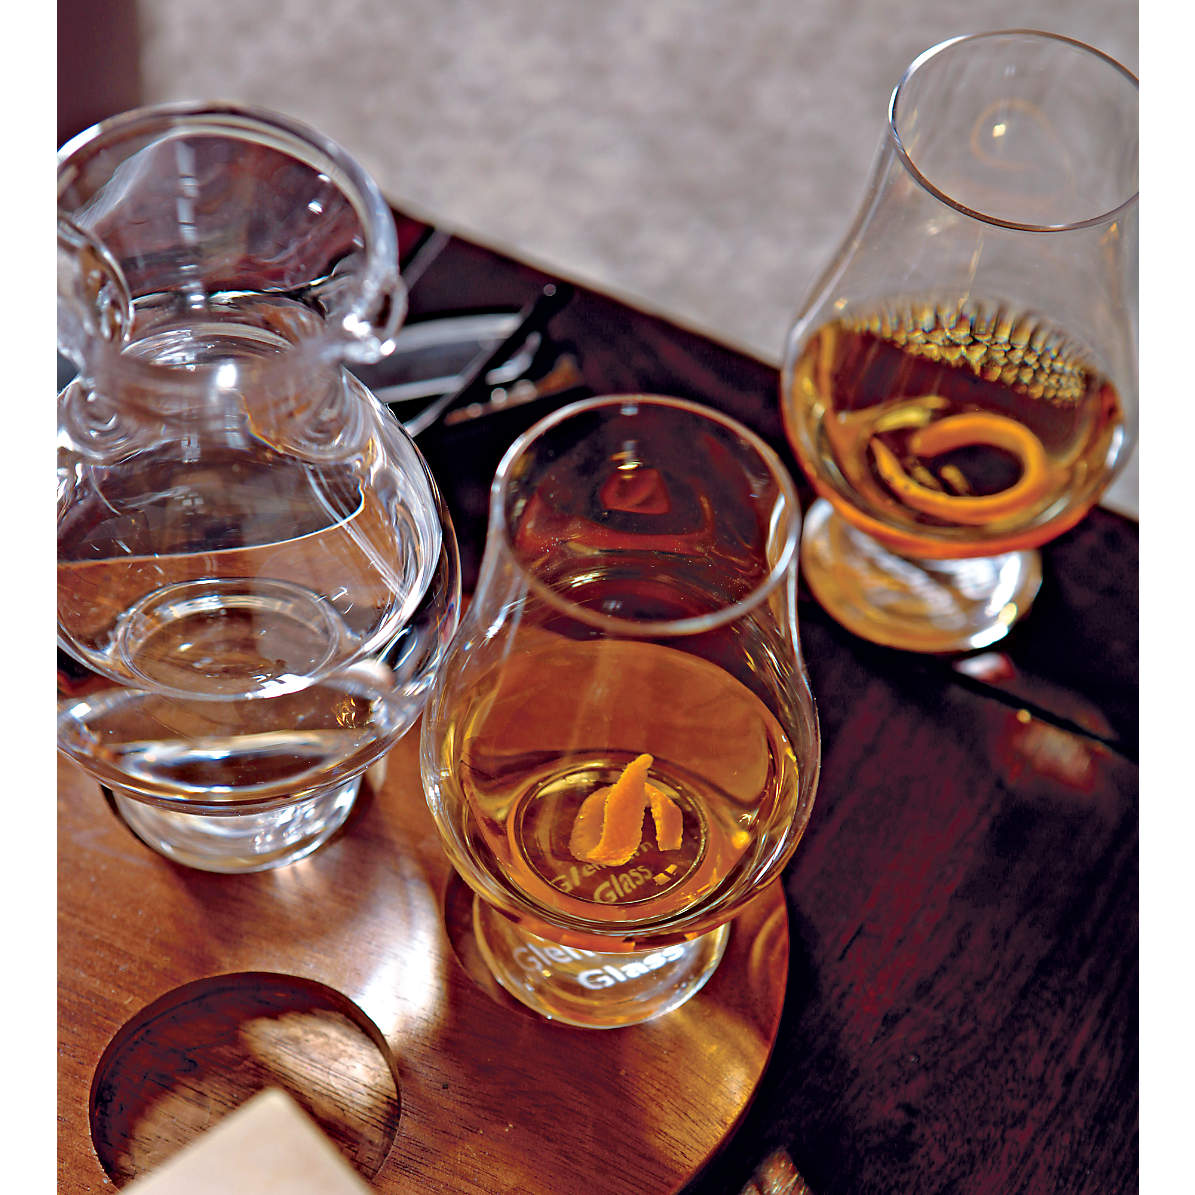 Glencairn Crystal Whiskey Glass, Set of 2 Hailed as "The Official Whiskey Glass" - image 2 of 8